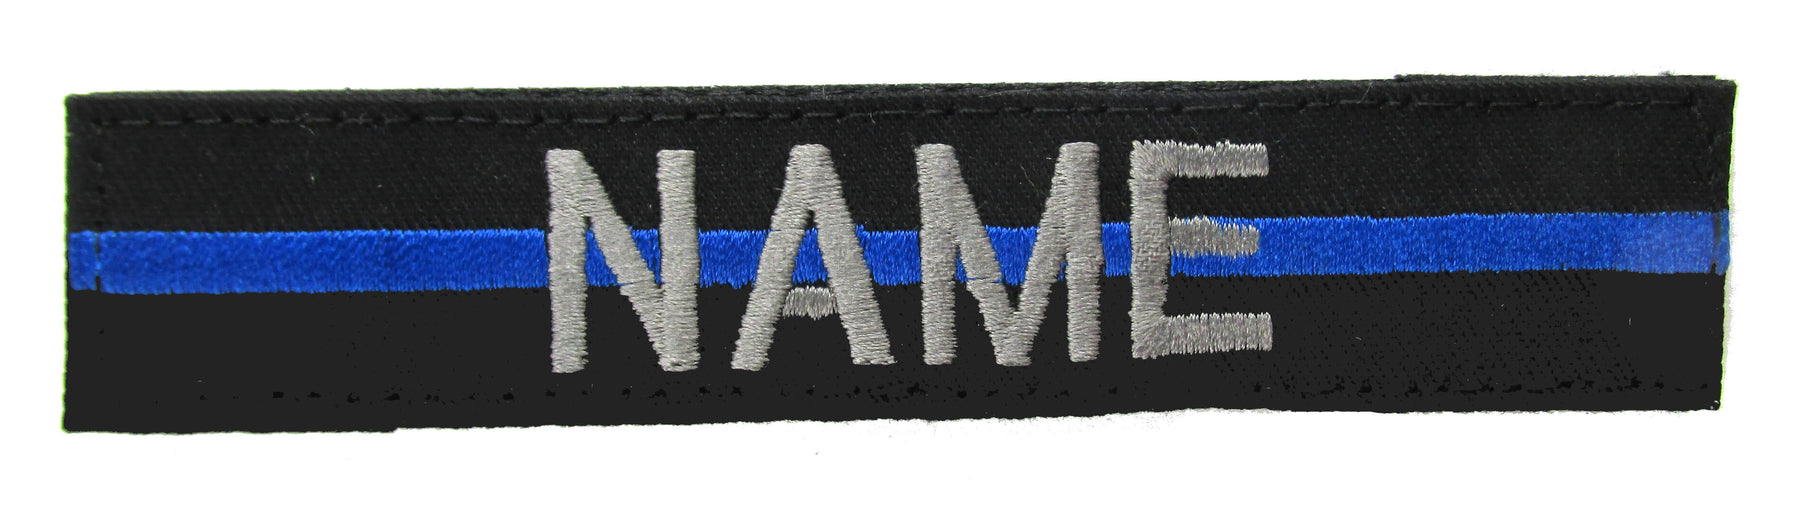 Thin Blue Line Name Tape with Hook Fastener